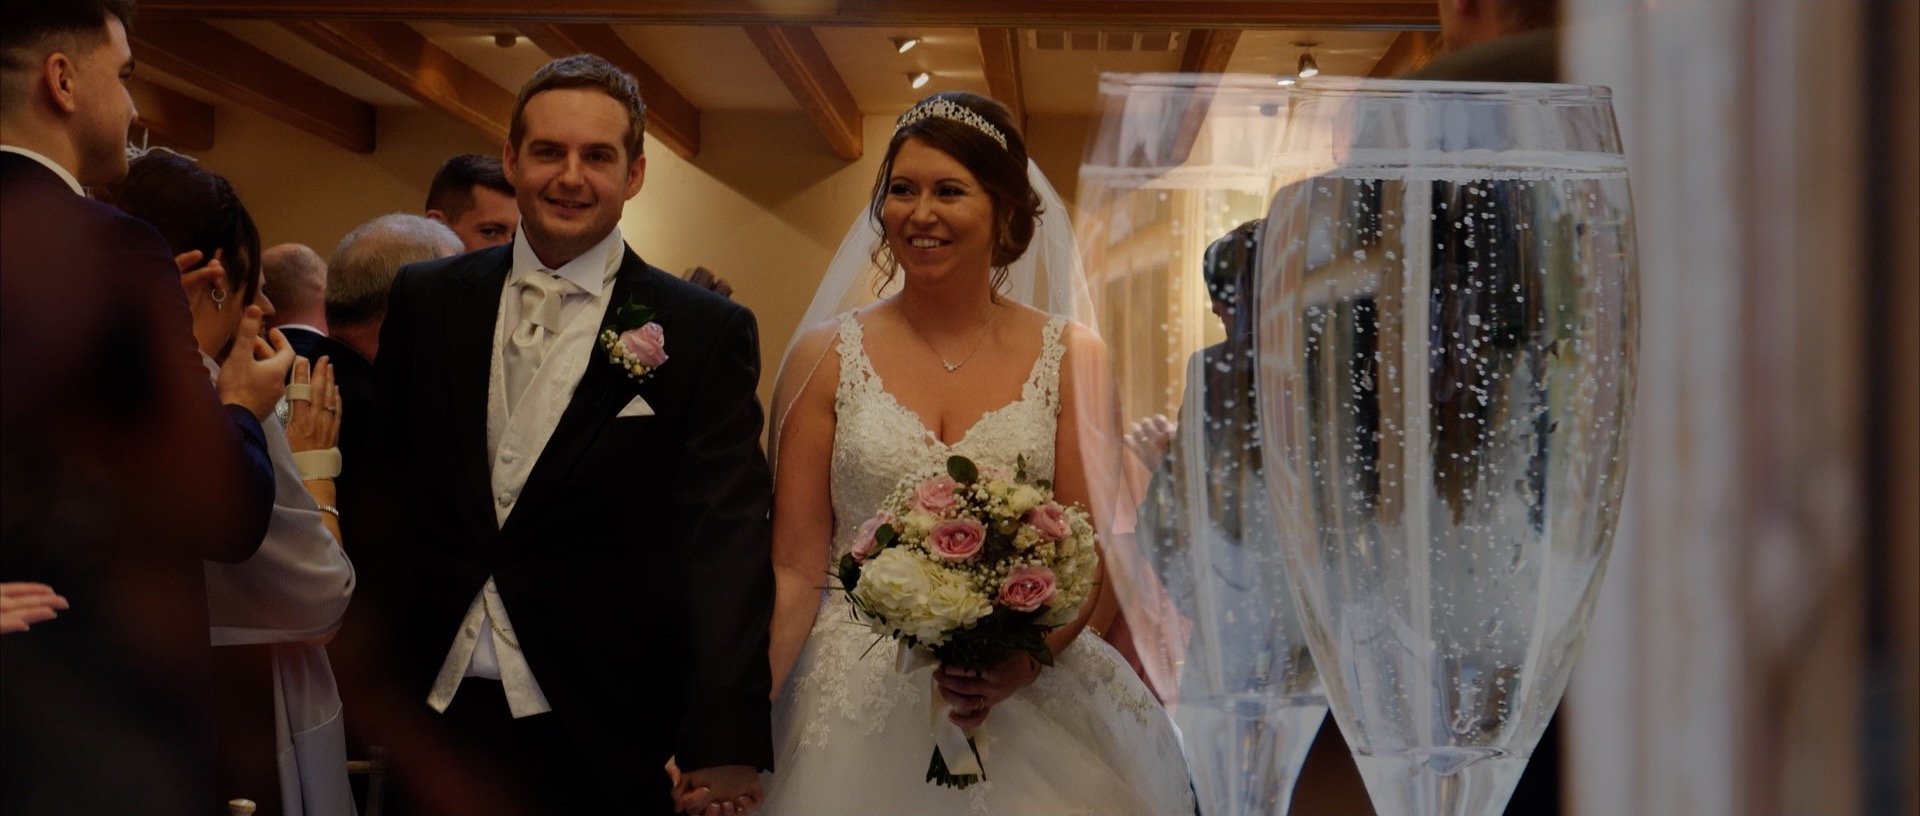 Just married at Mulberry House Essex Wedding Video.jpg